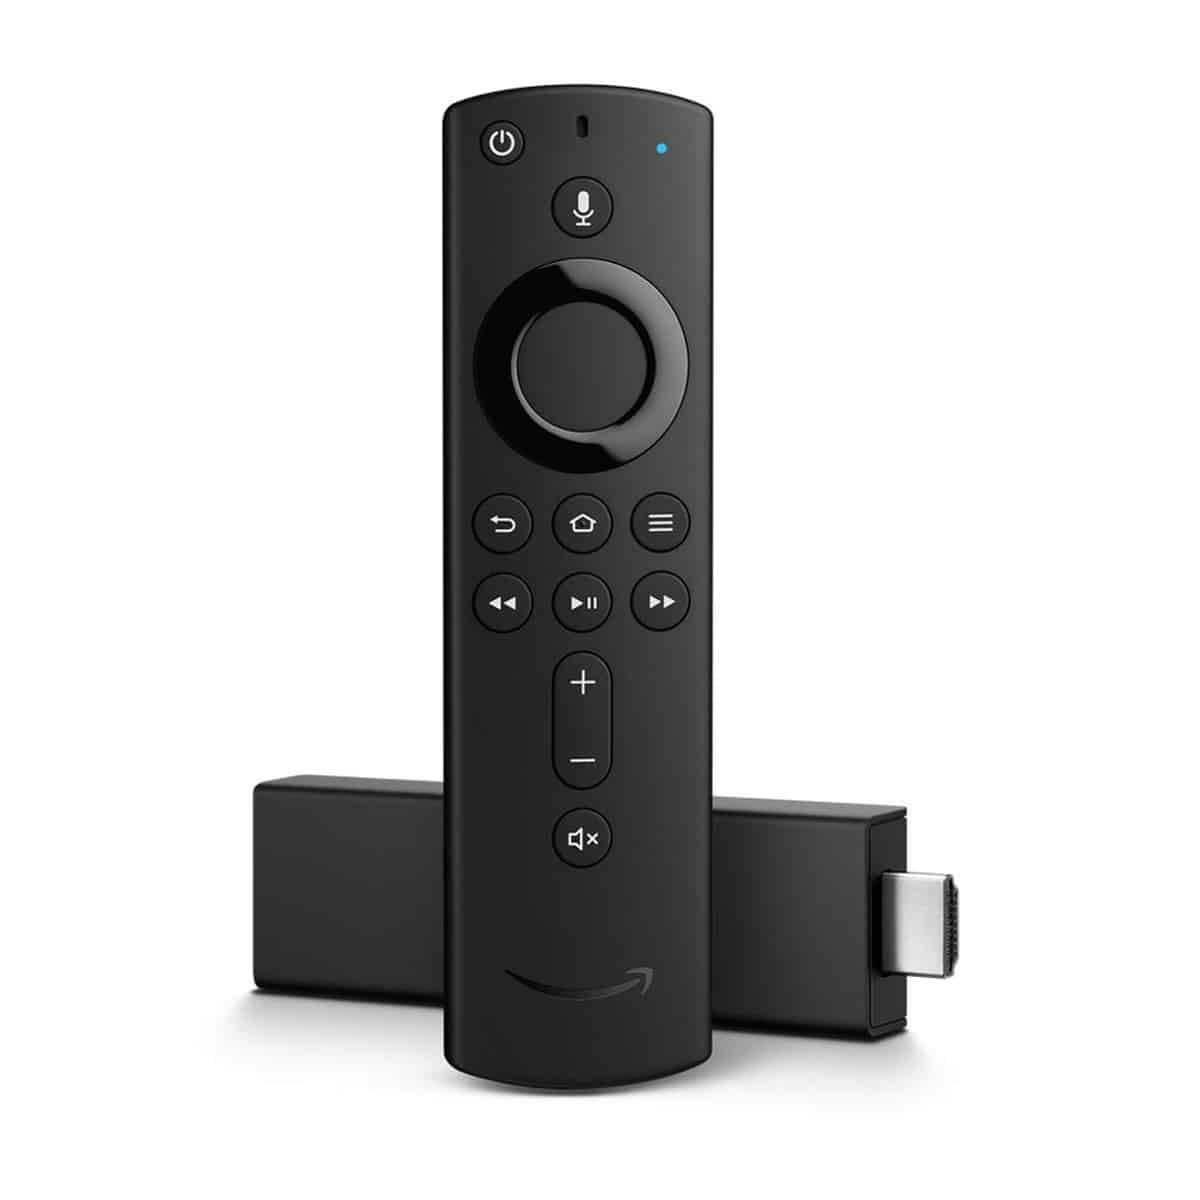 Streaming Devices Face Off: Chromecast VS Fire Stick